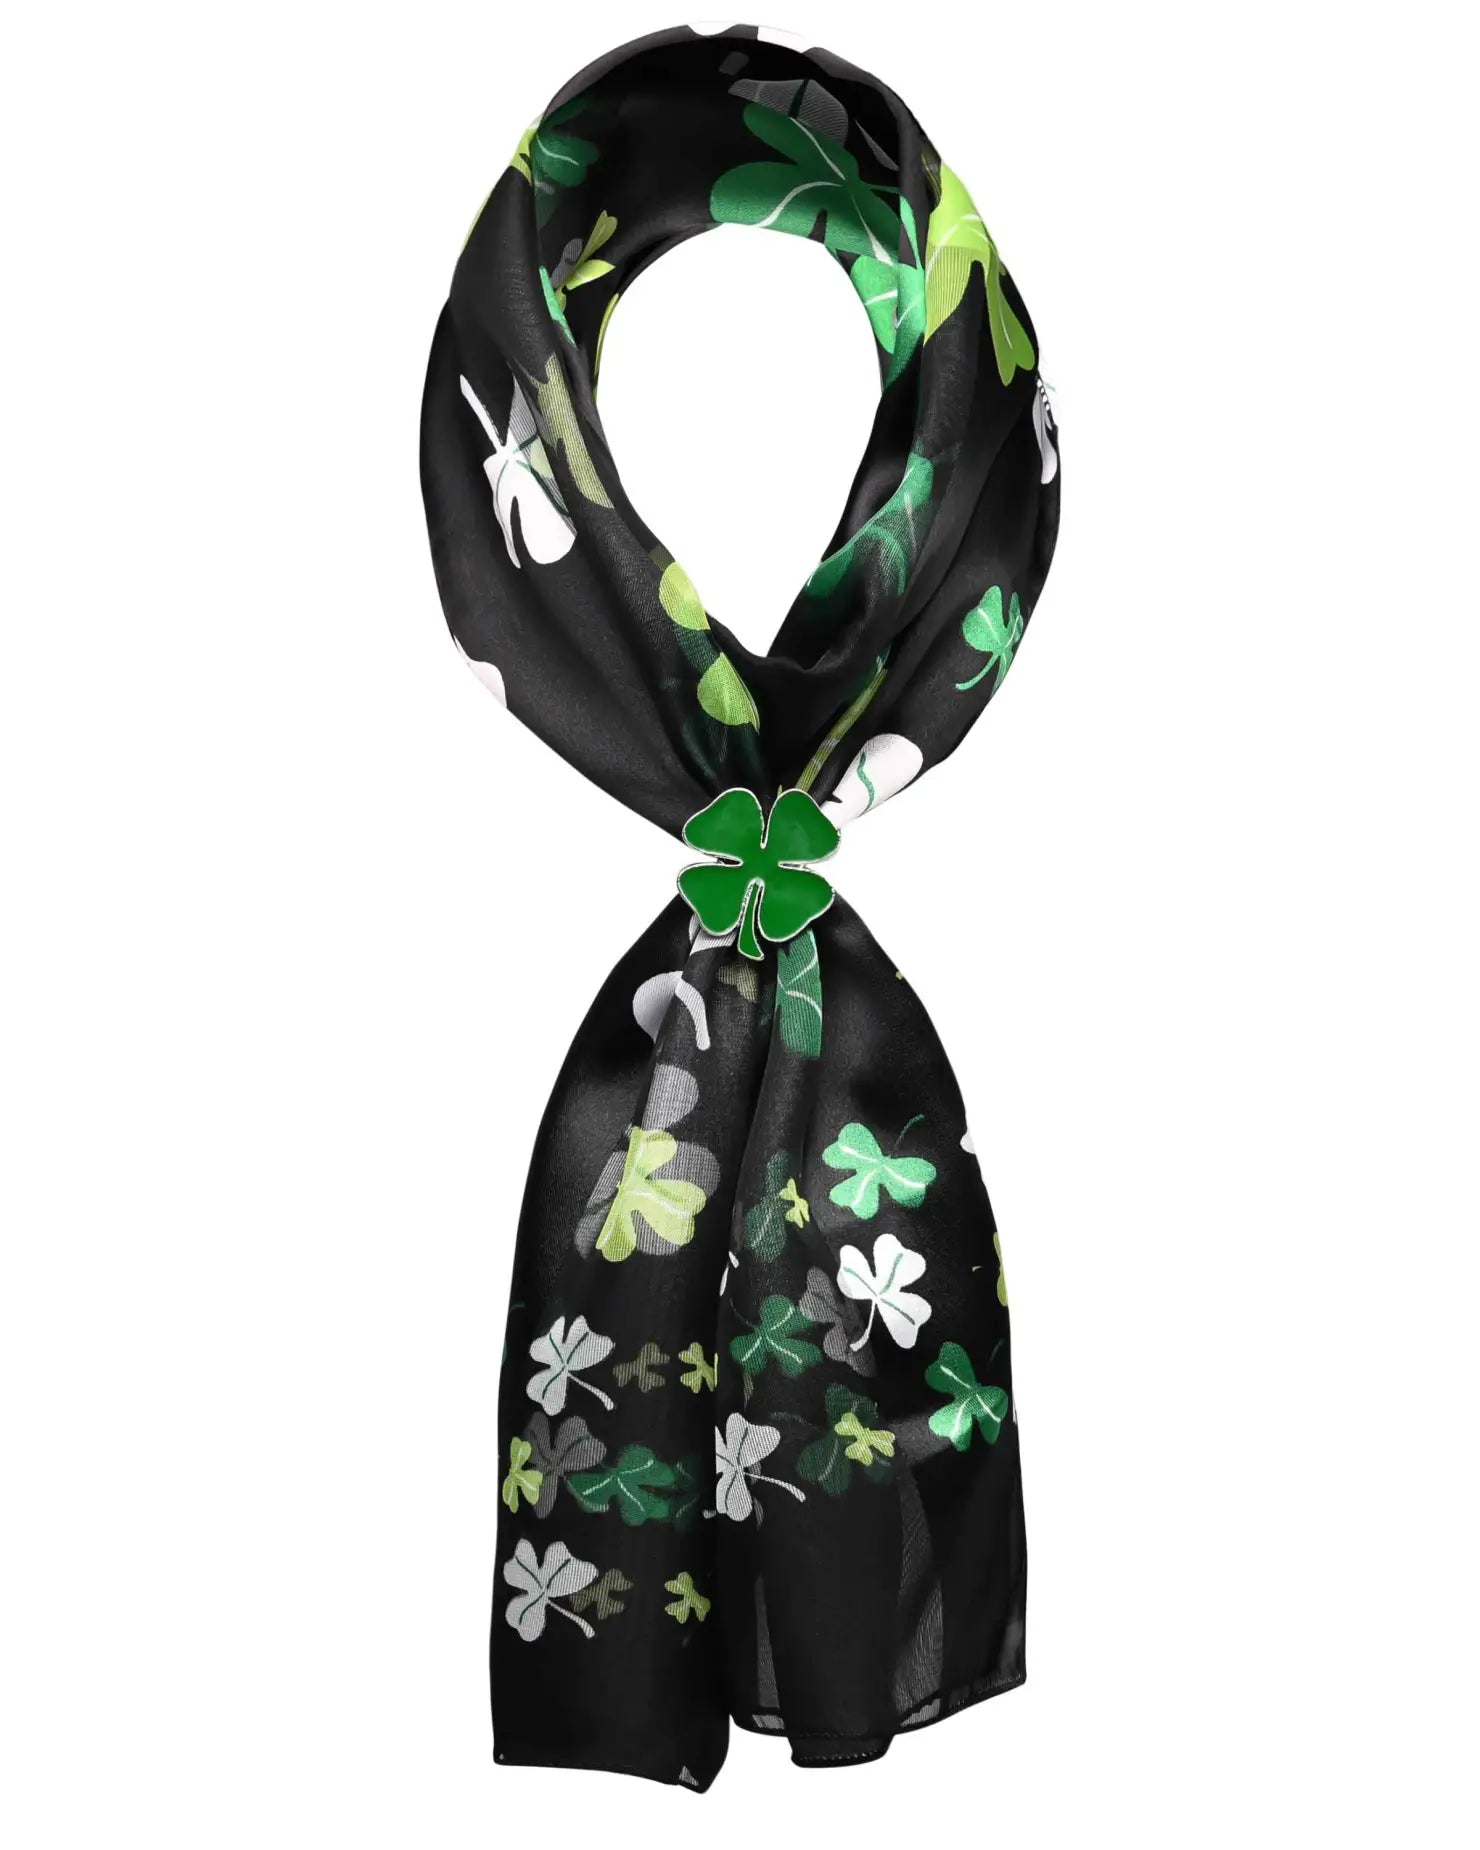 Celtic shamrock satin scarf with green leaves for St. Patrick’s Day